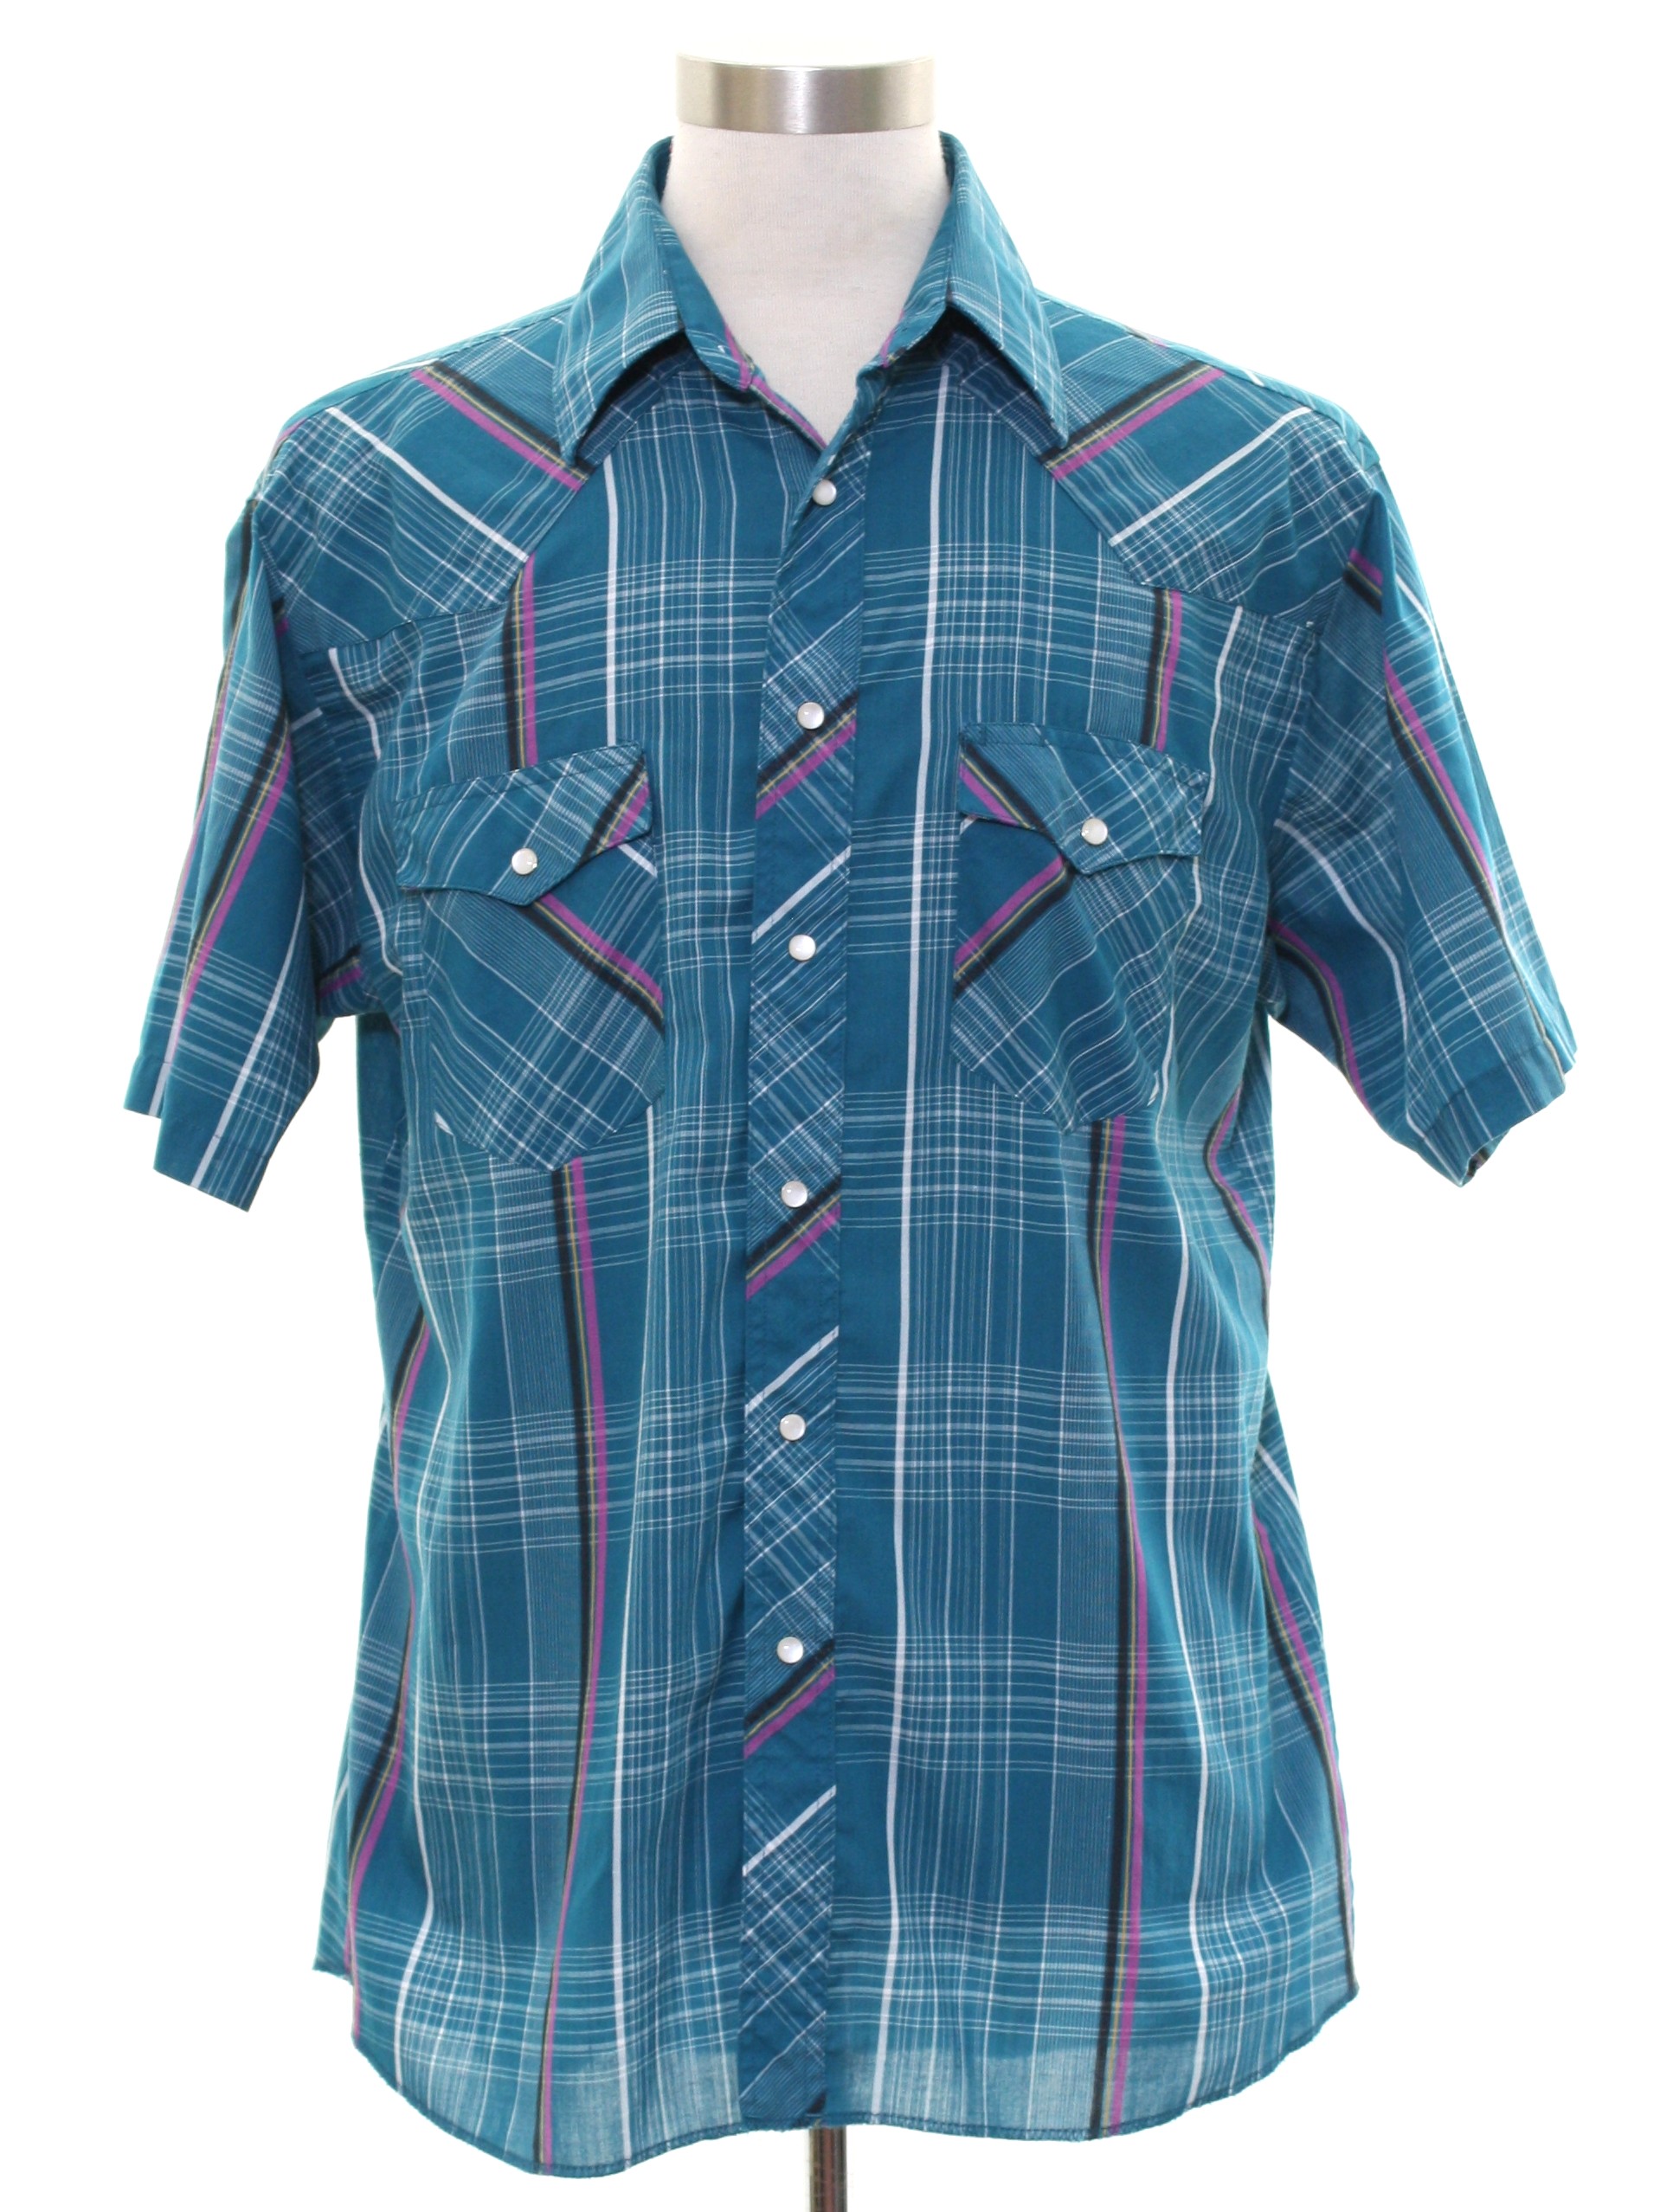 Western Shirt: 90s -Wrangler- Mens teal background polyester cotton ...